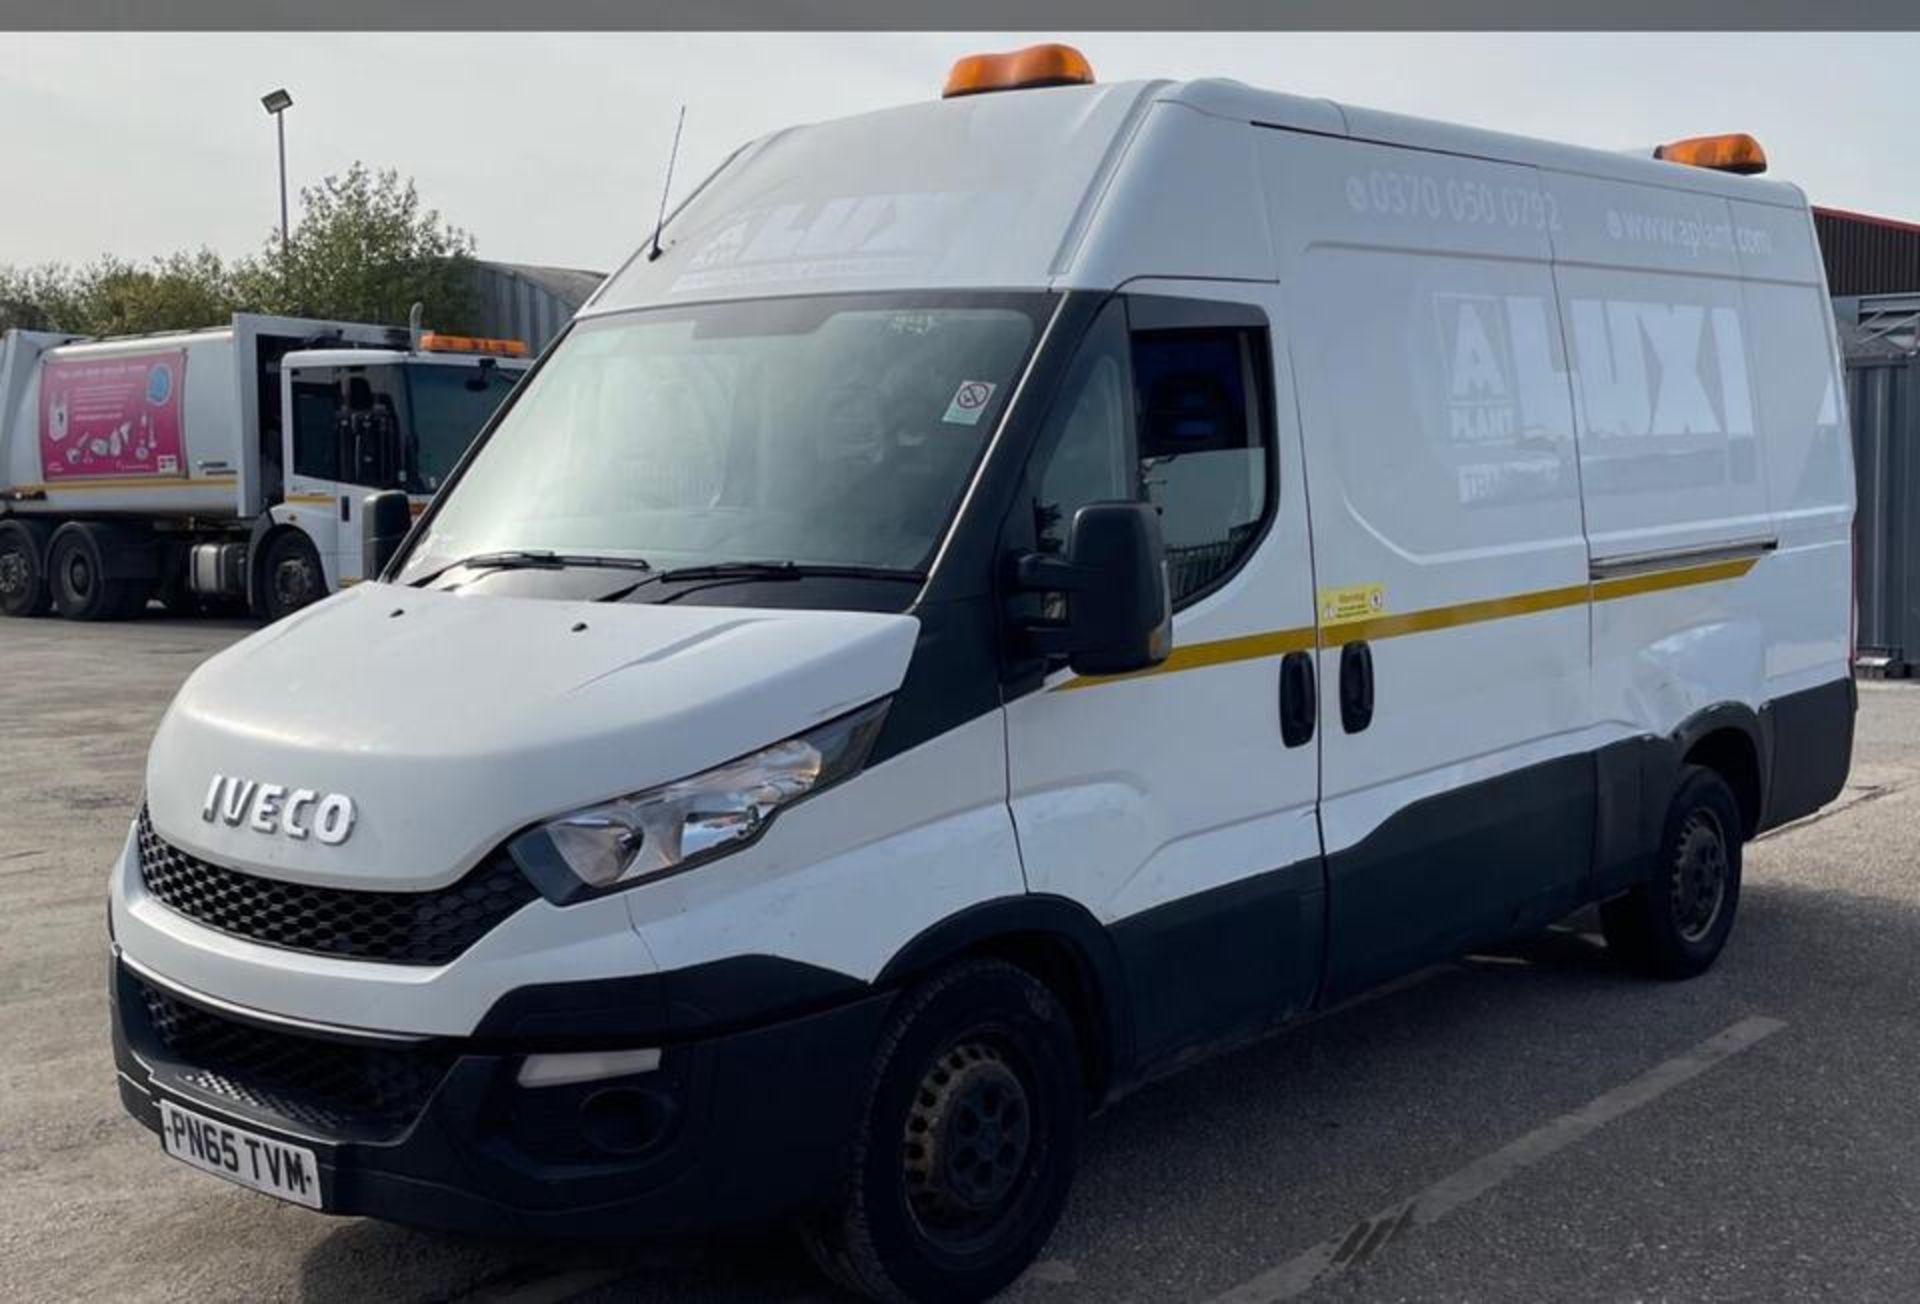 2015 IVECO DAILY-115K MILES-HPI CLEAR -READY TO GO! - Image 11 of 12